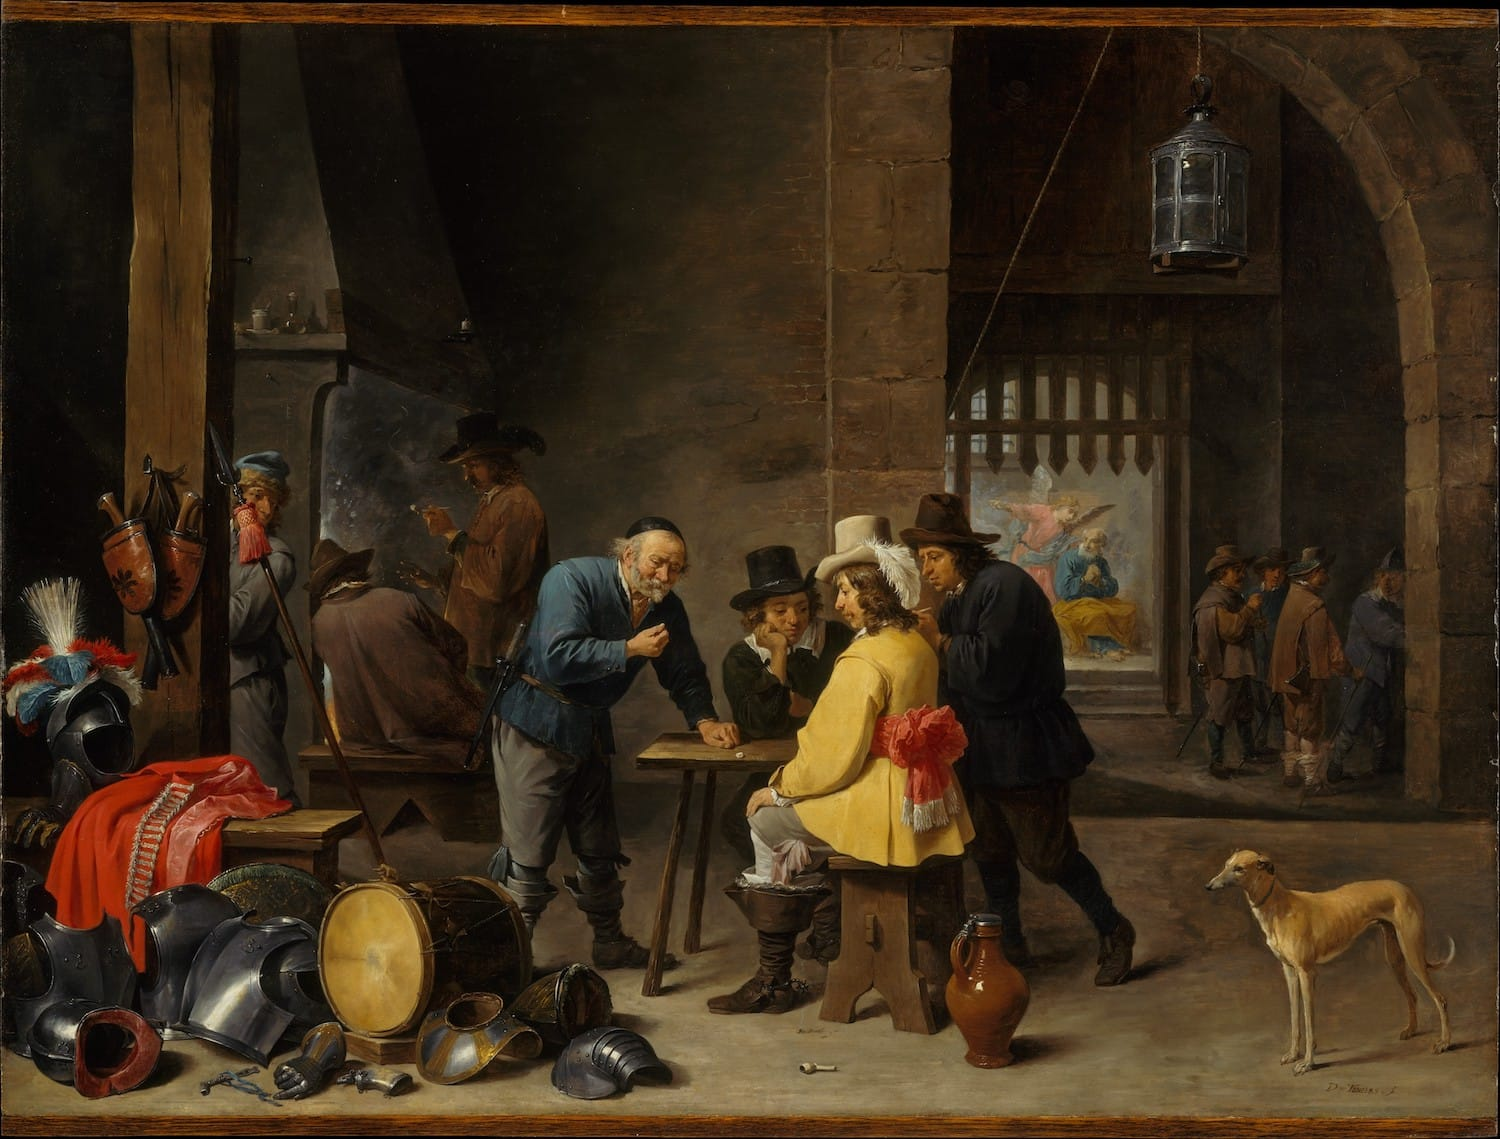 A painting titled "Guardroom with the Deliverance of Saint Peter"